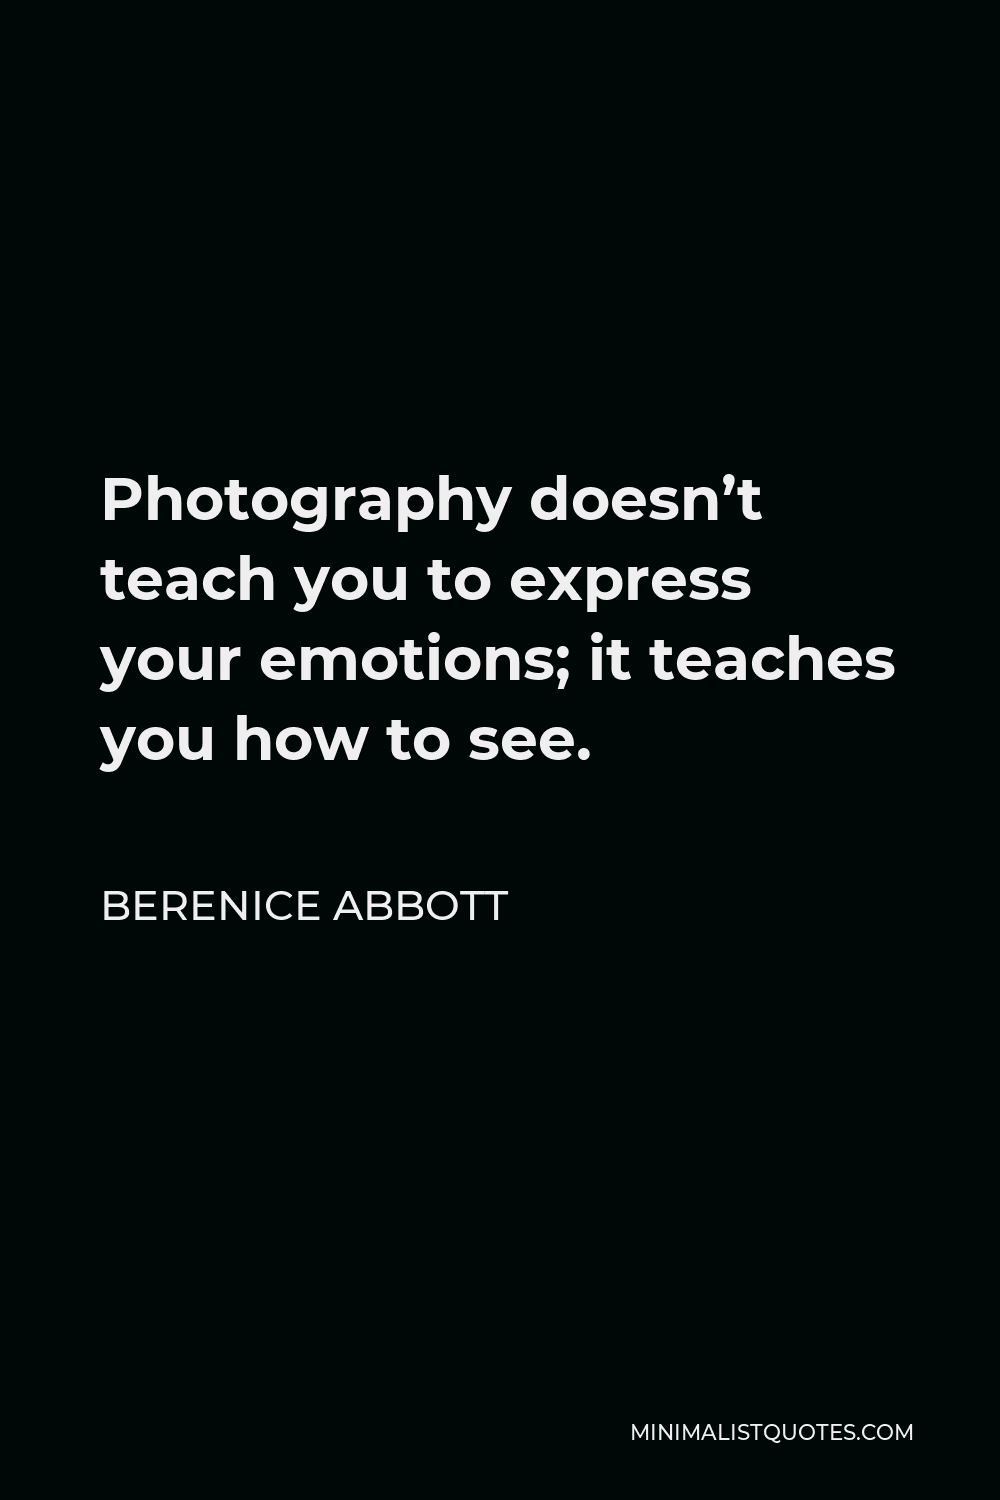 Berenice Abbott Quote - Photography doesn’t teach you to express your emotions; it teaches you how to see.